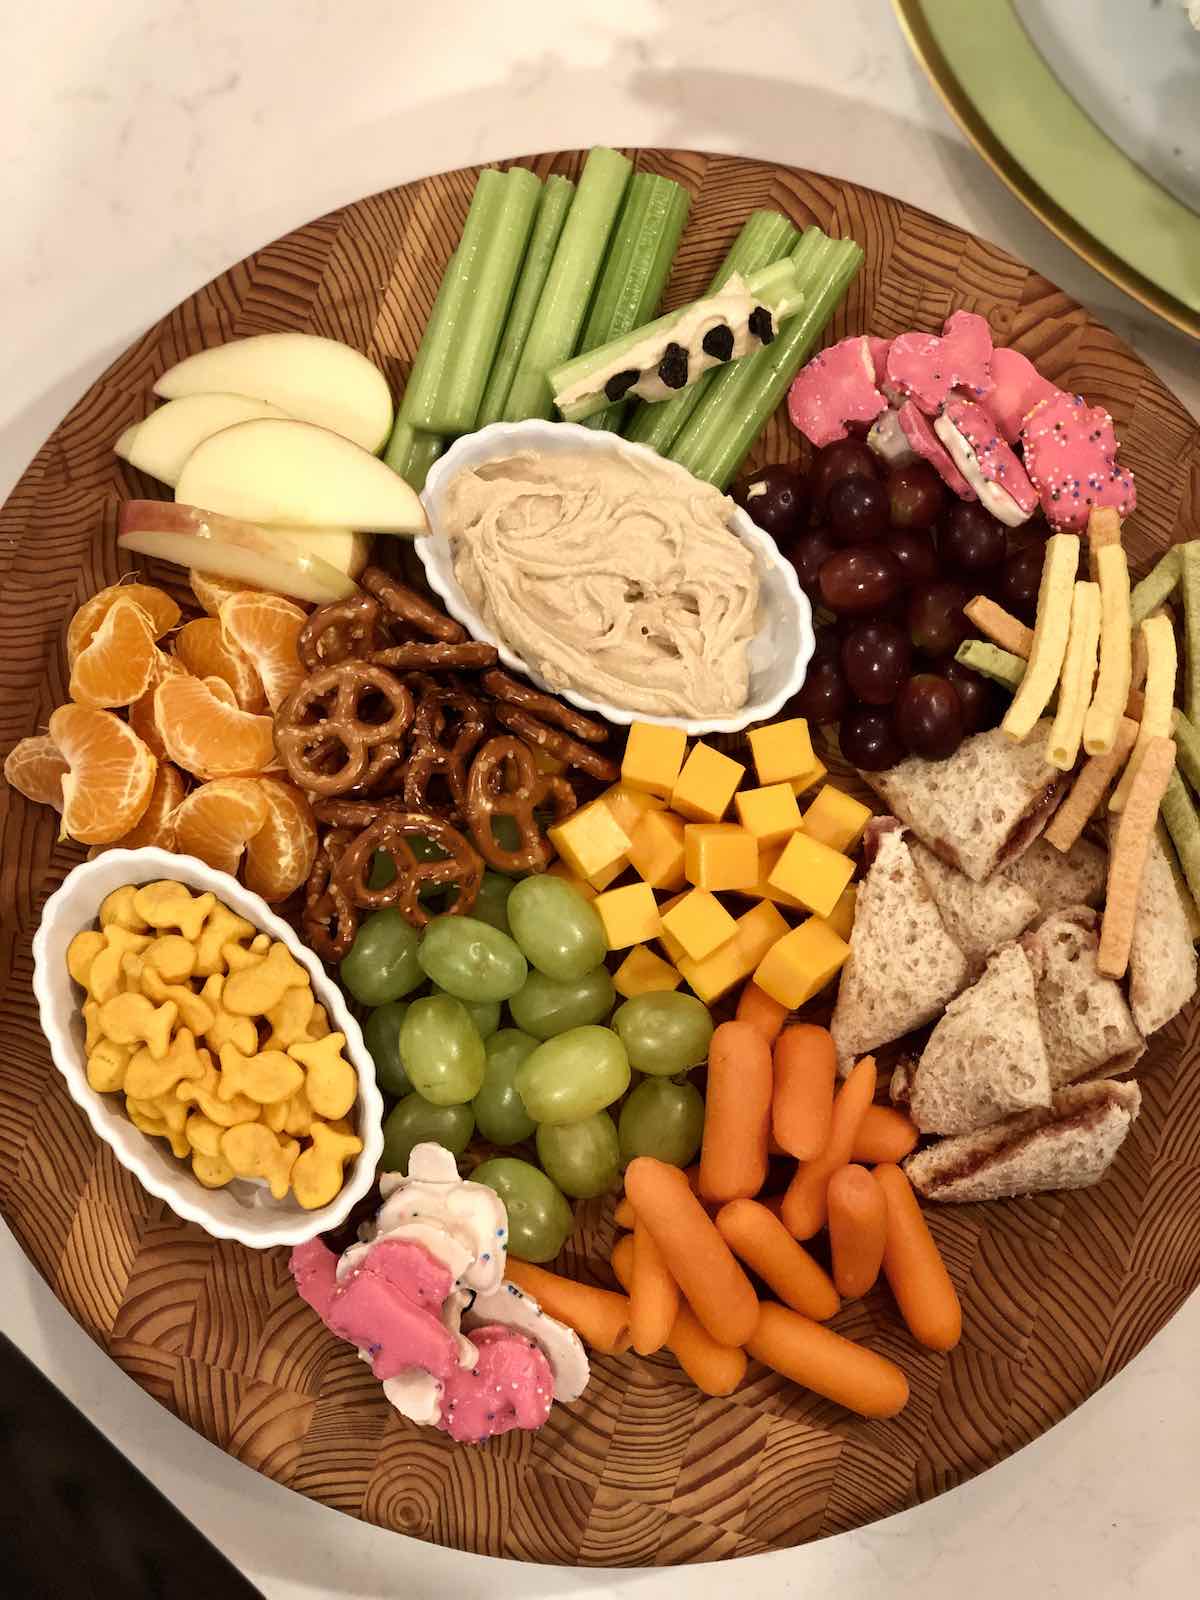 Fall Charcuterie Board Ideas for Your Autumn Gatherings - Marie Bostwick